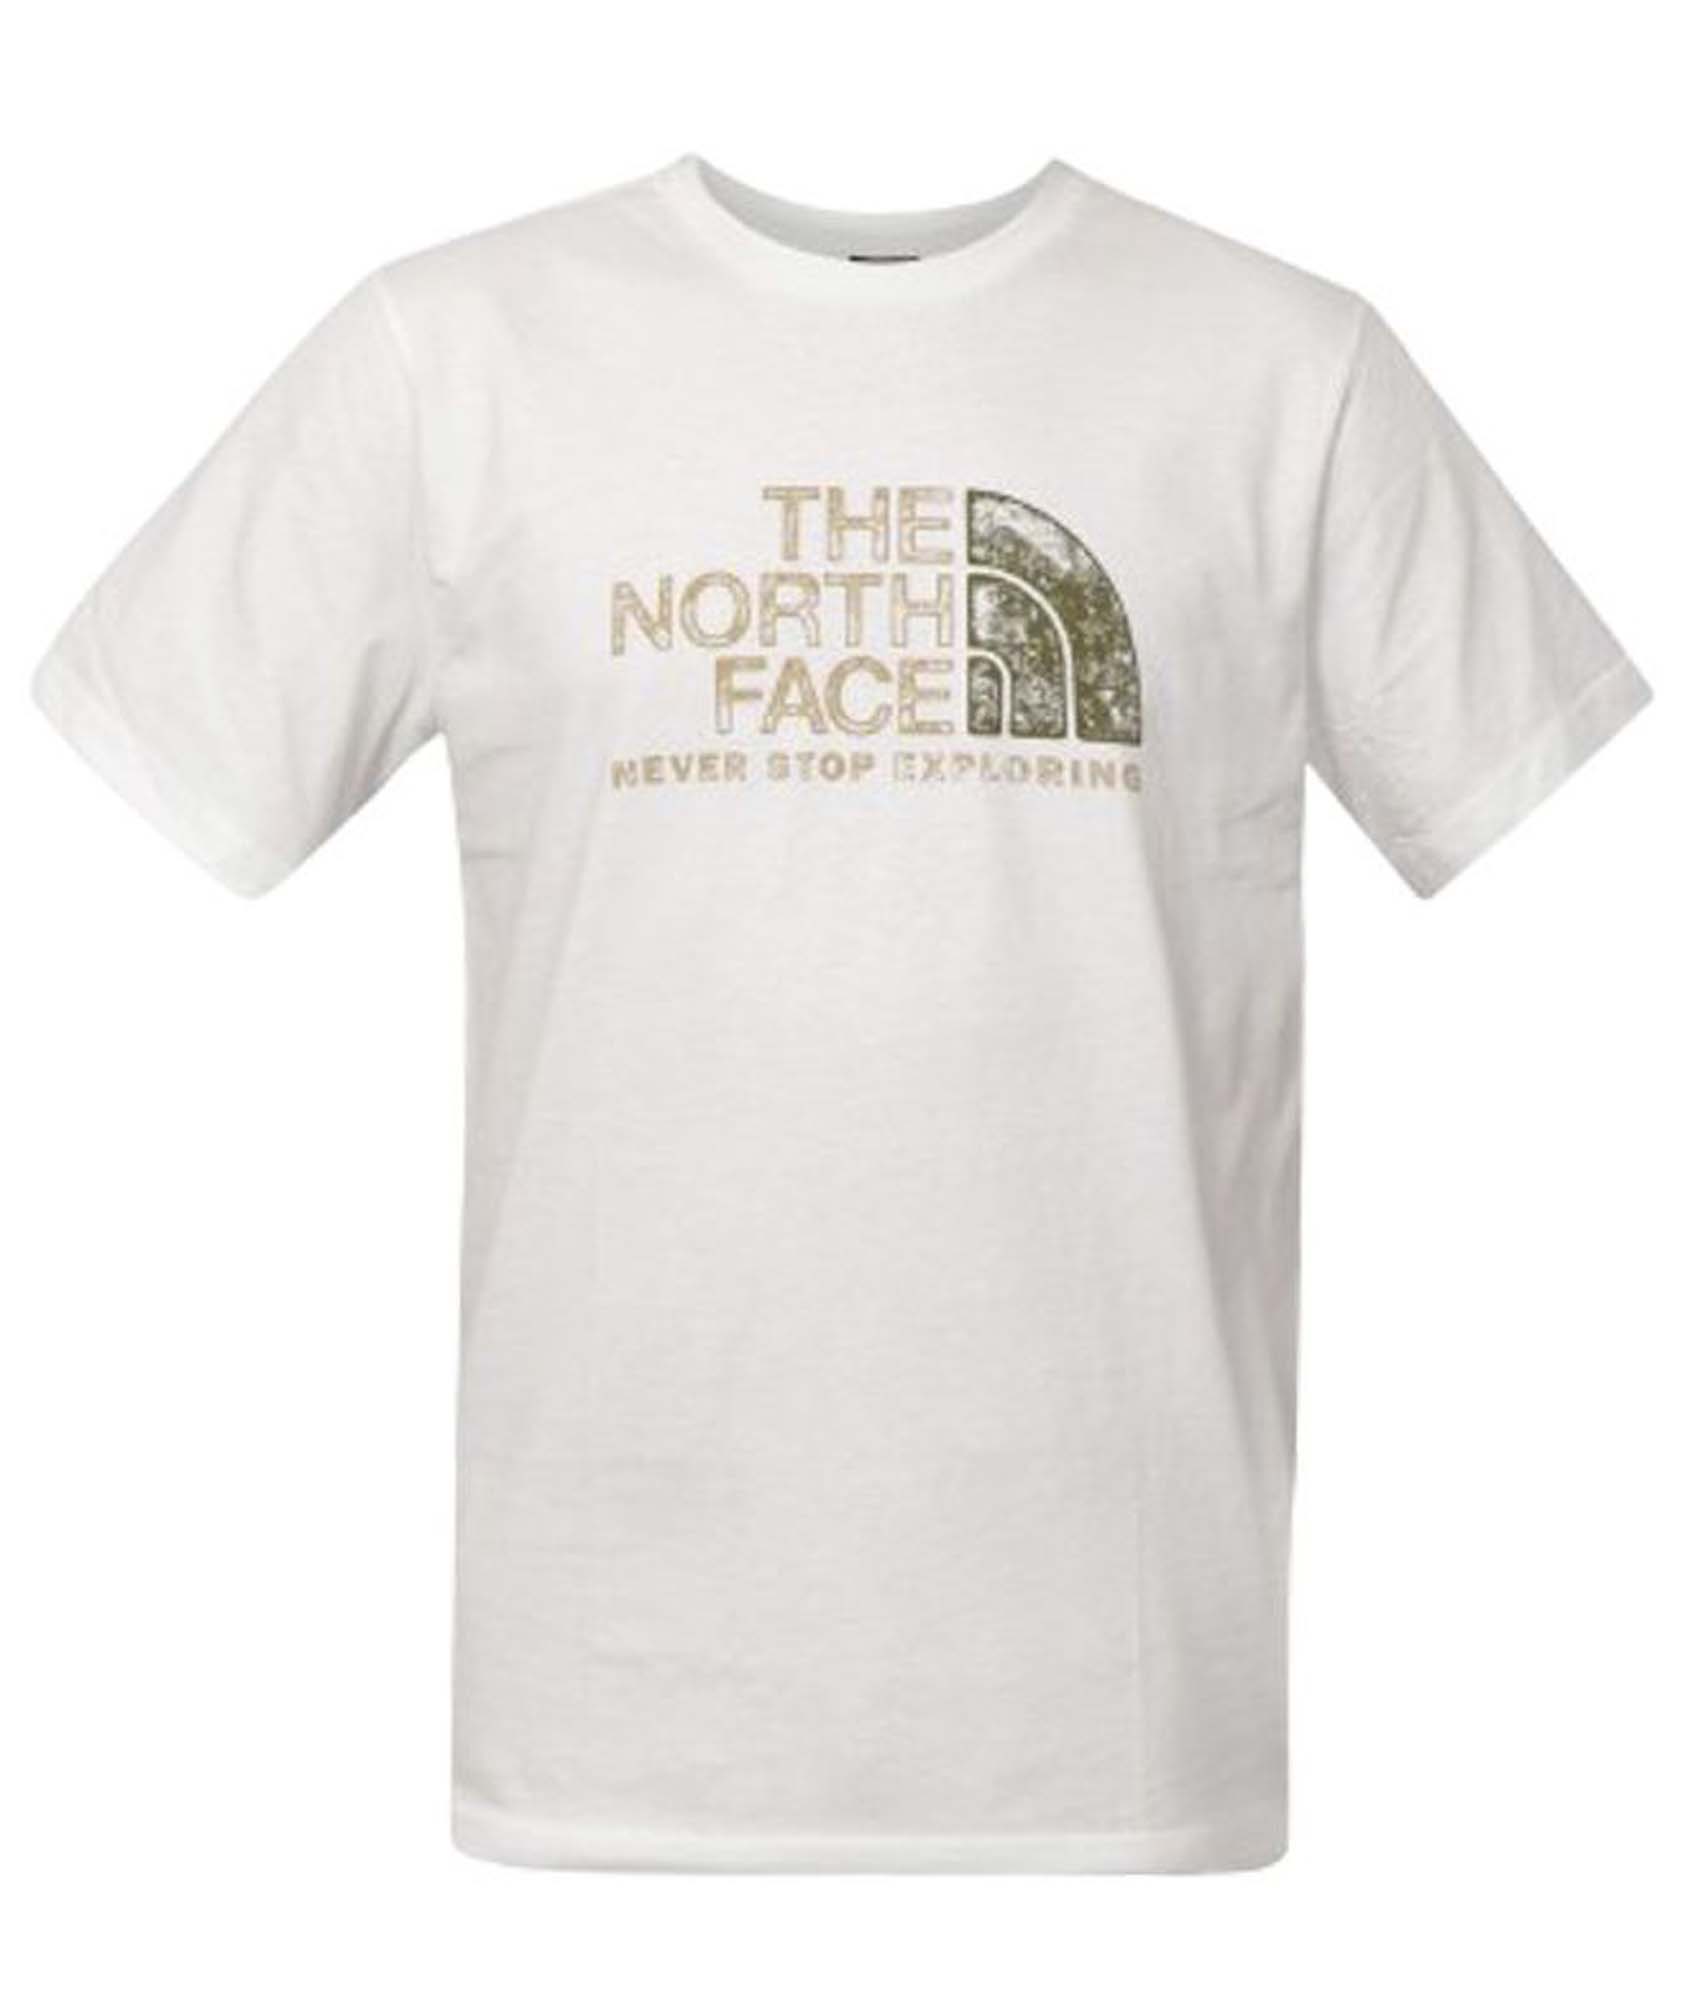 THE NORTH FACE M s/s rust 2 tee